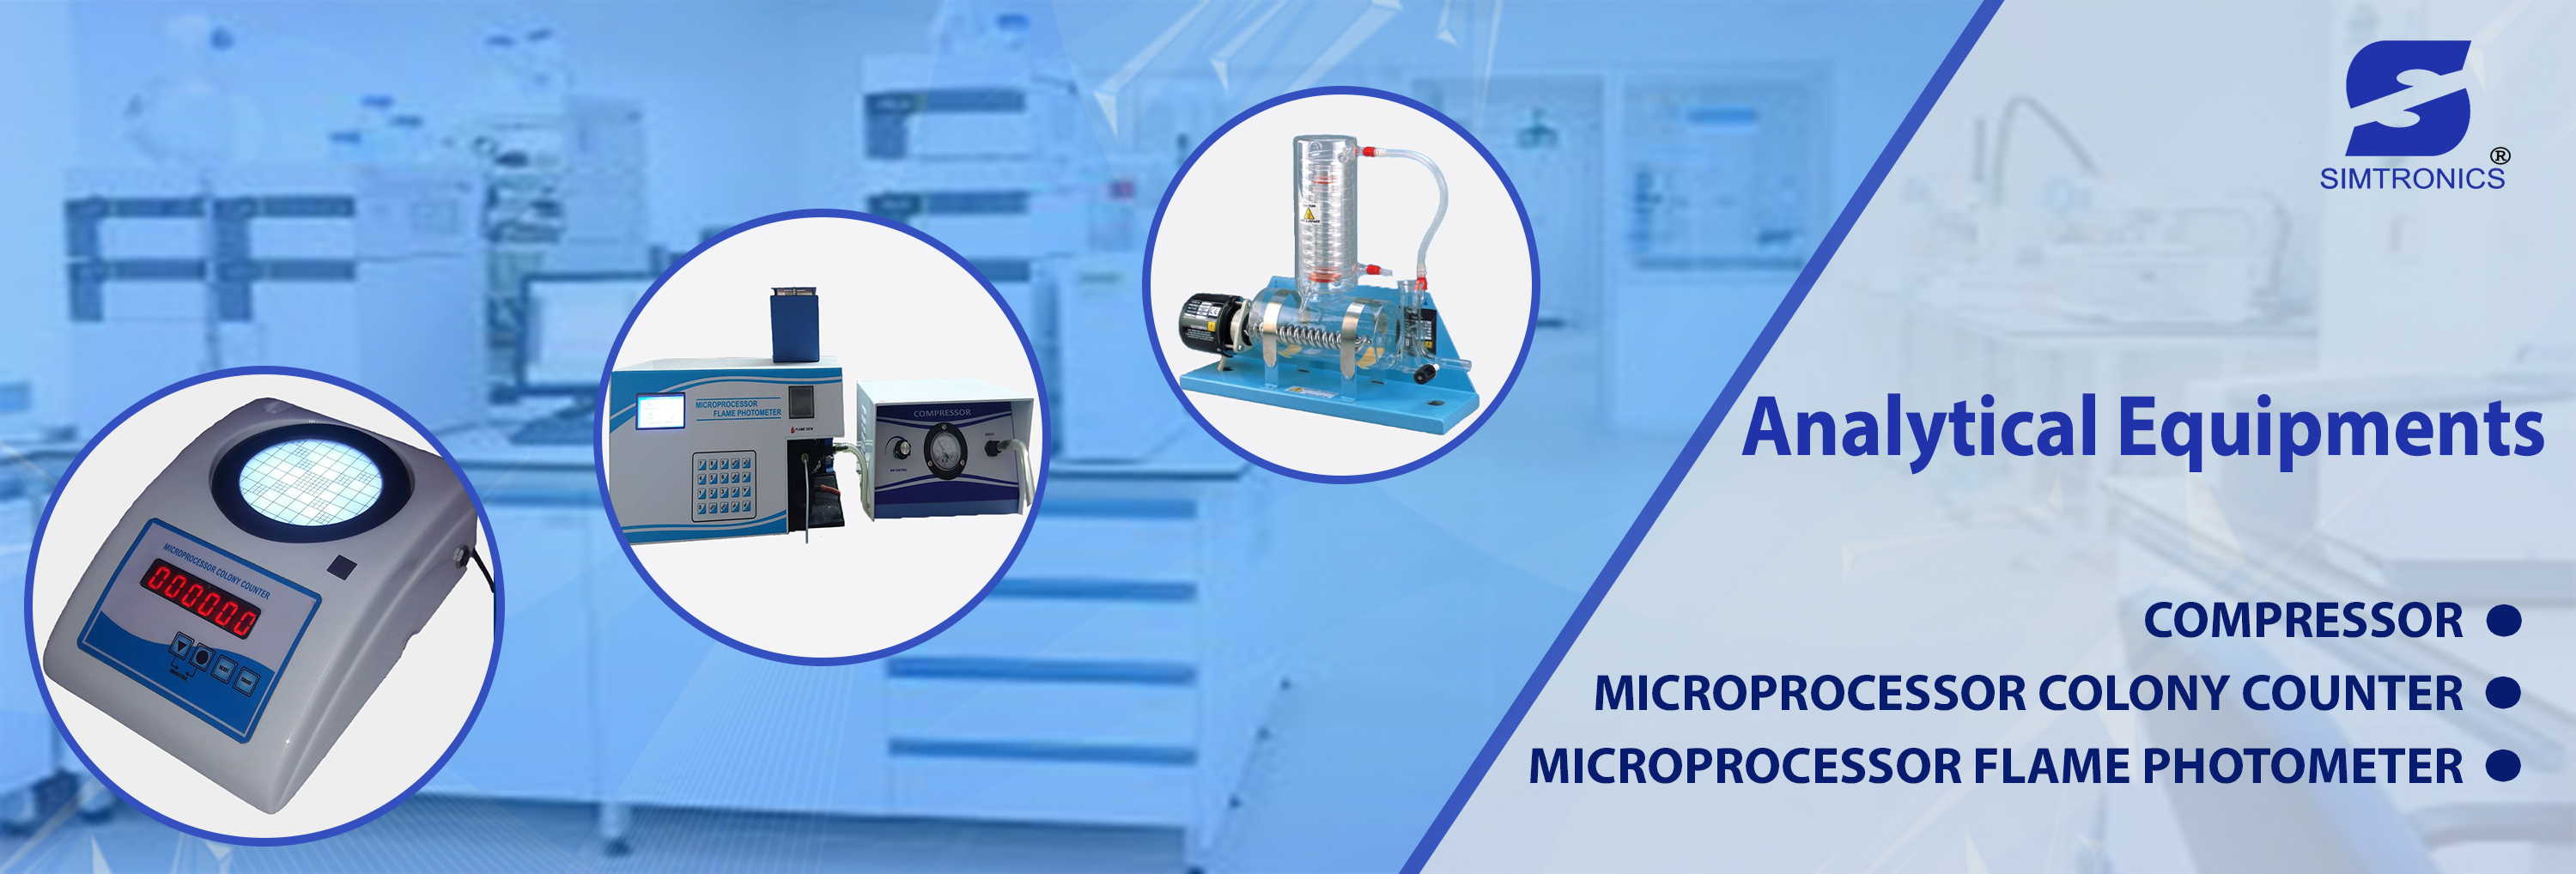 Manufacturer Of Laboratory and Analytical Equipments - SIMTRONICS